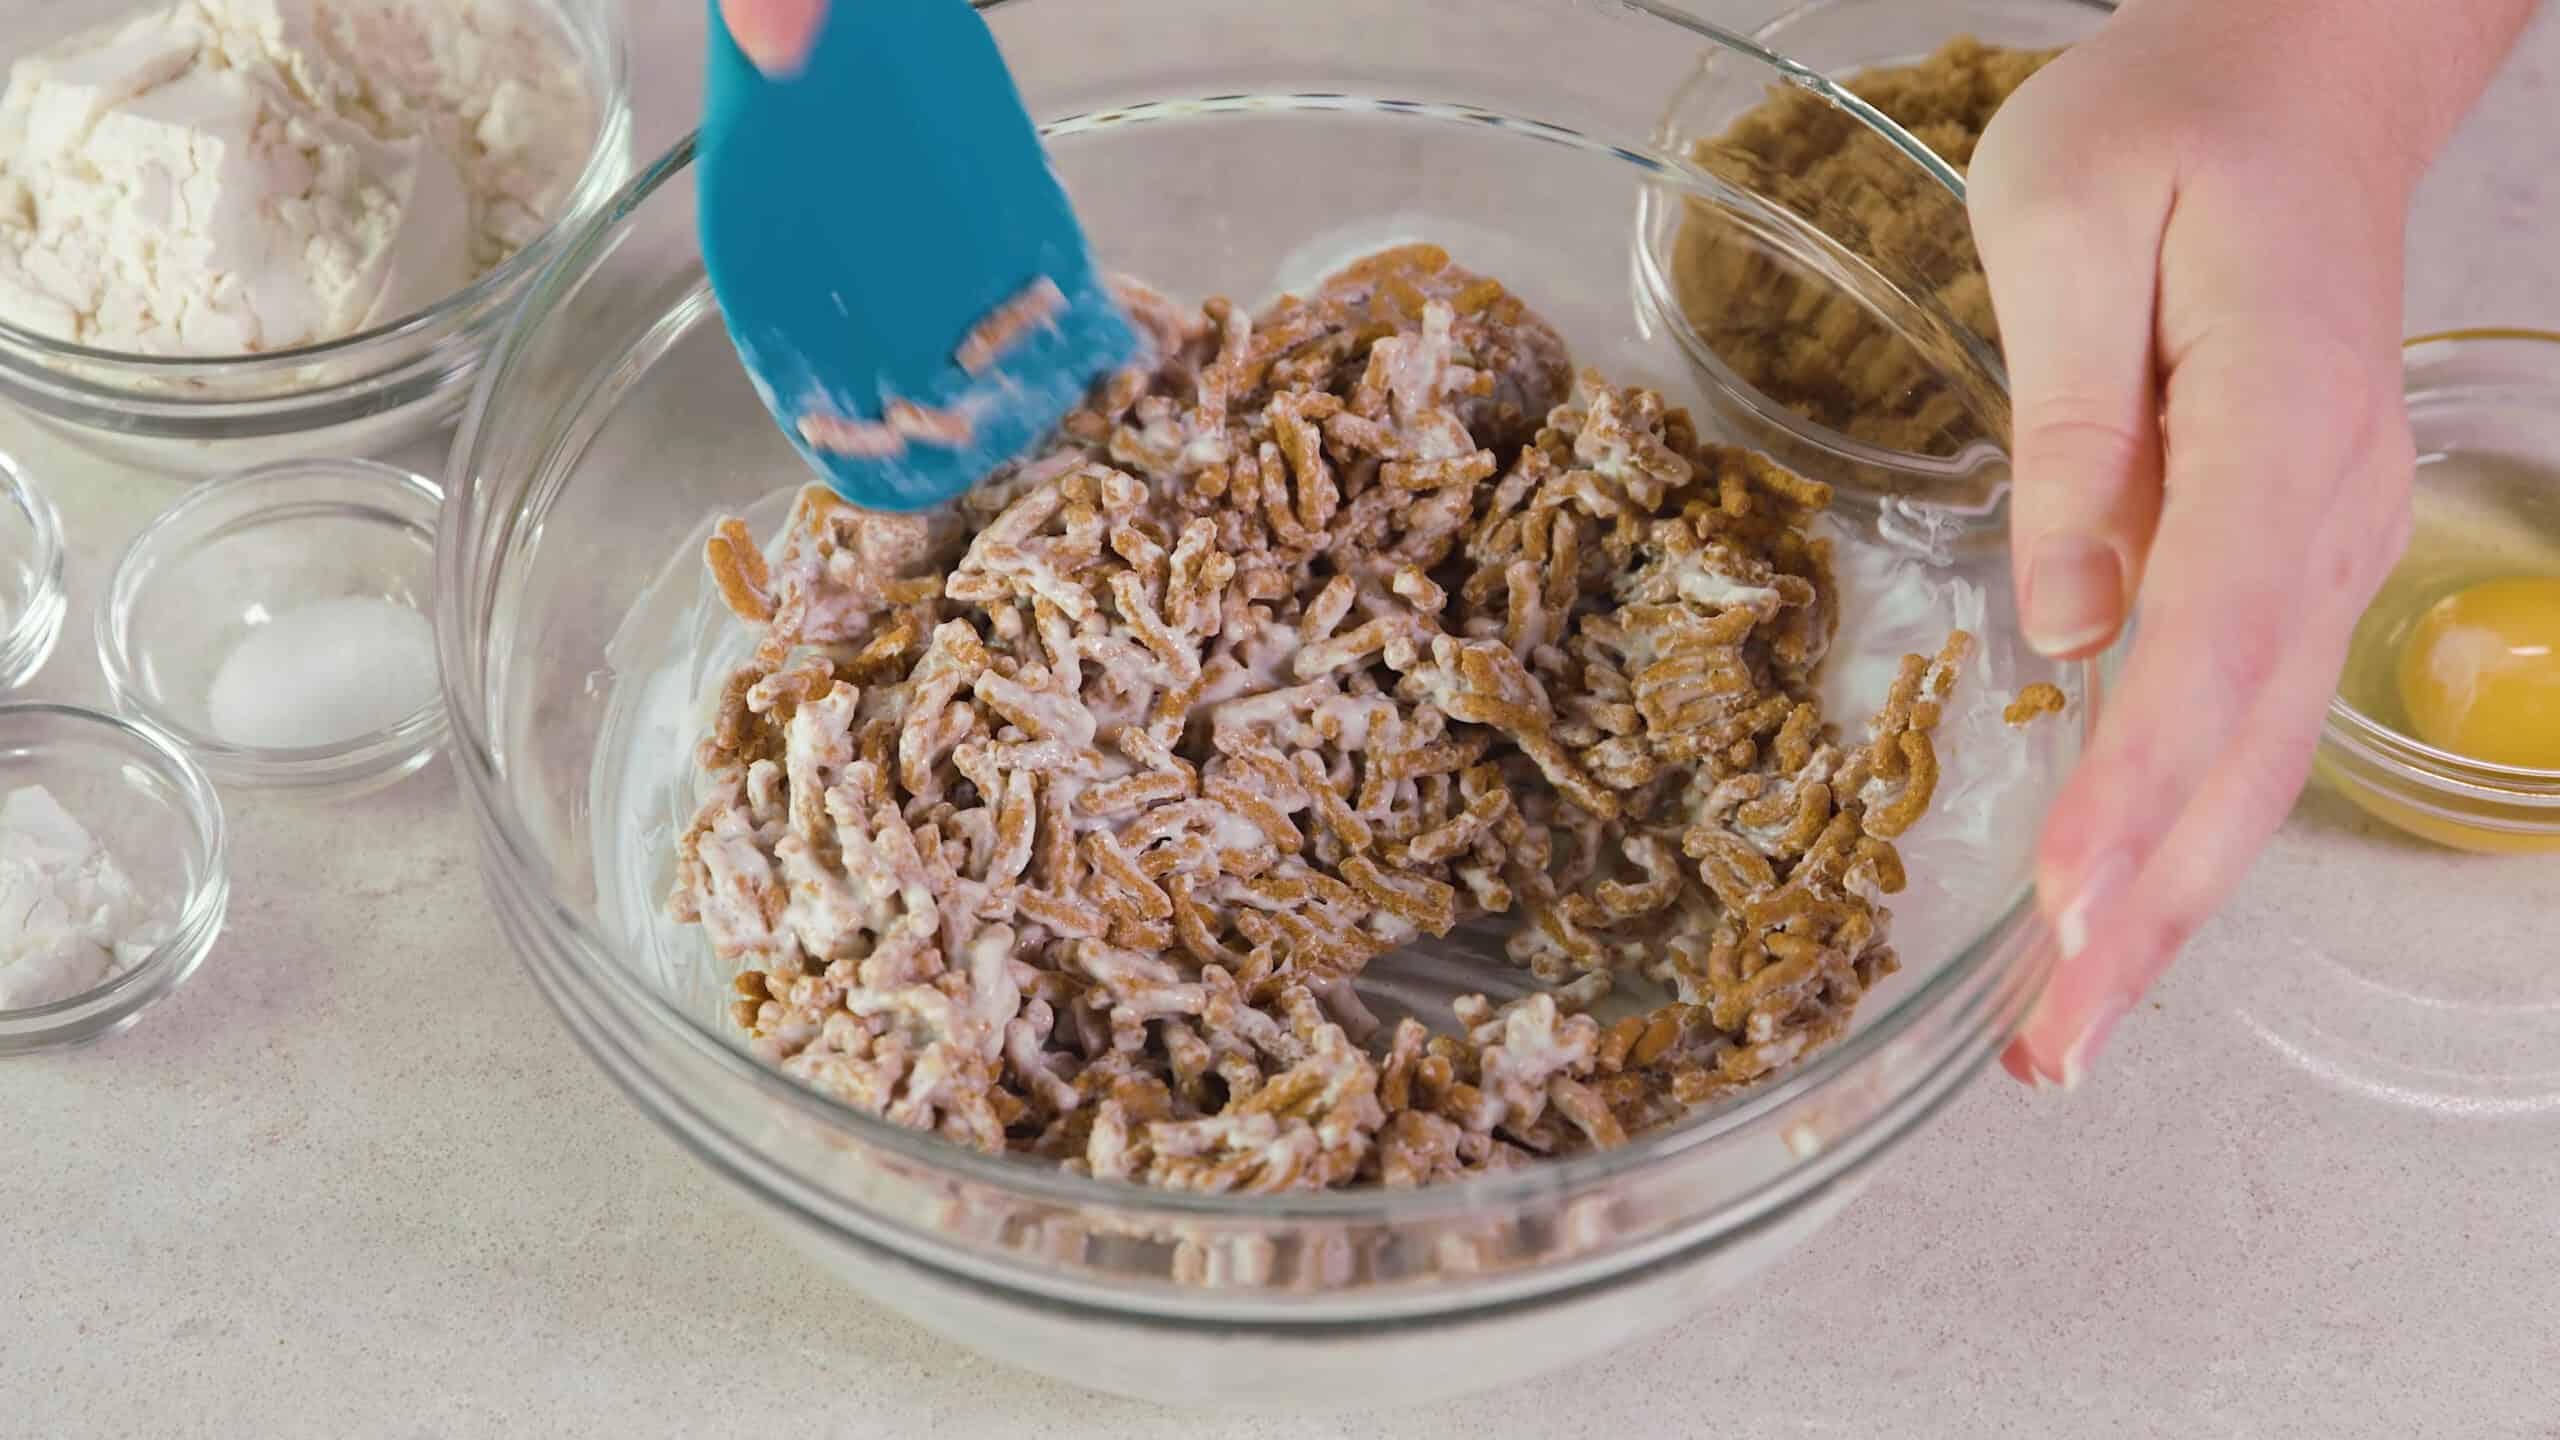 Close-up view of a large clear glass mixing bowl filled with 100% bran cereal mixed with buttermilk with a plastic spatula.